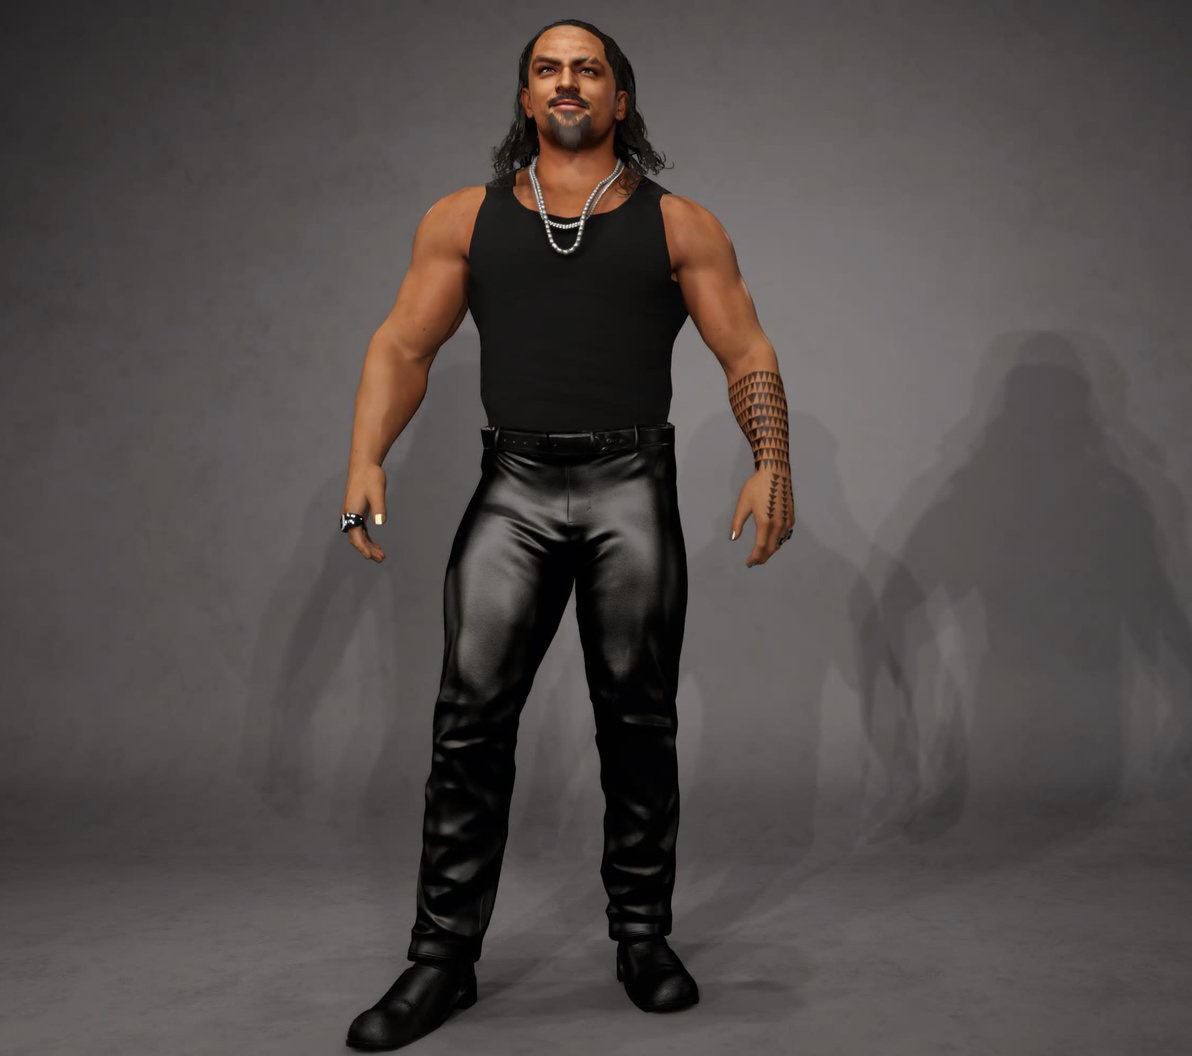 Dante Reyes leather jacket attires created used on @BrandonSaxony Jason Momoa CAW he did an absolutely phenomenal job creating him i jus changed the hair n facial hair to match Dante Reyes https://t.co/aOzI5Sc78J